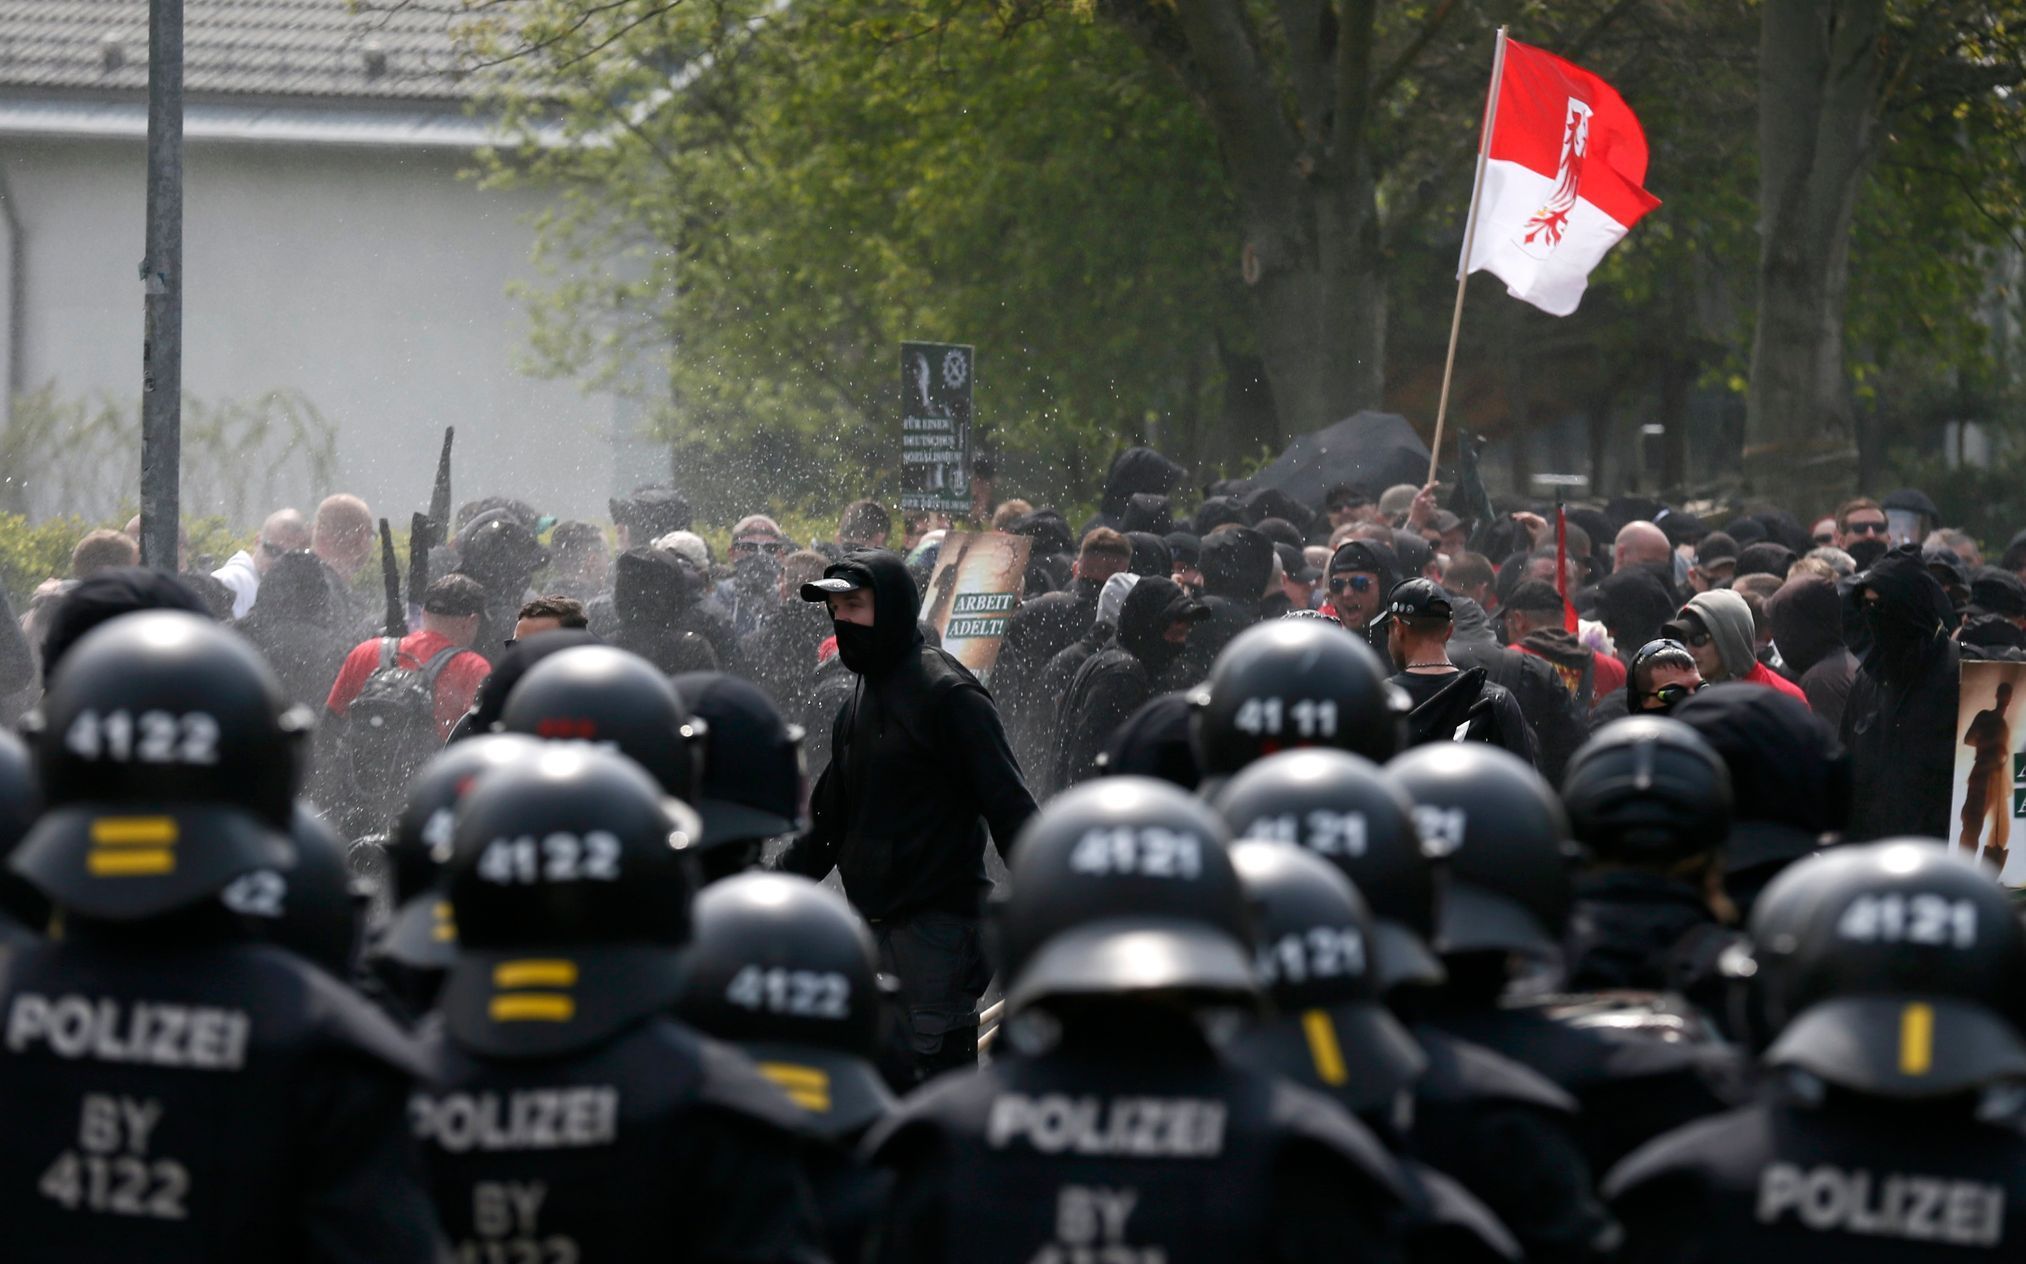 German police scuffles with right-wing protestors during a demonstration in the town of Plauen